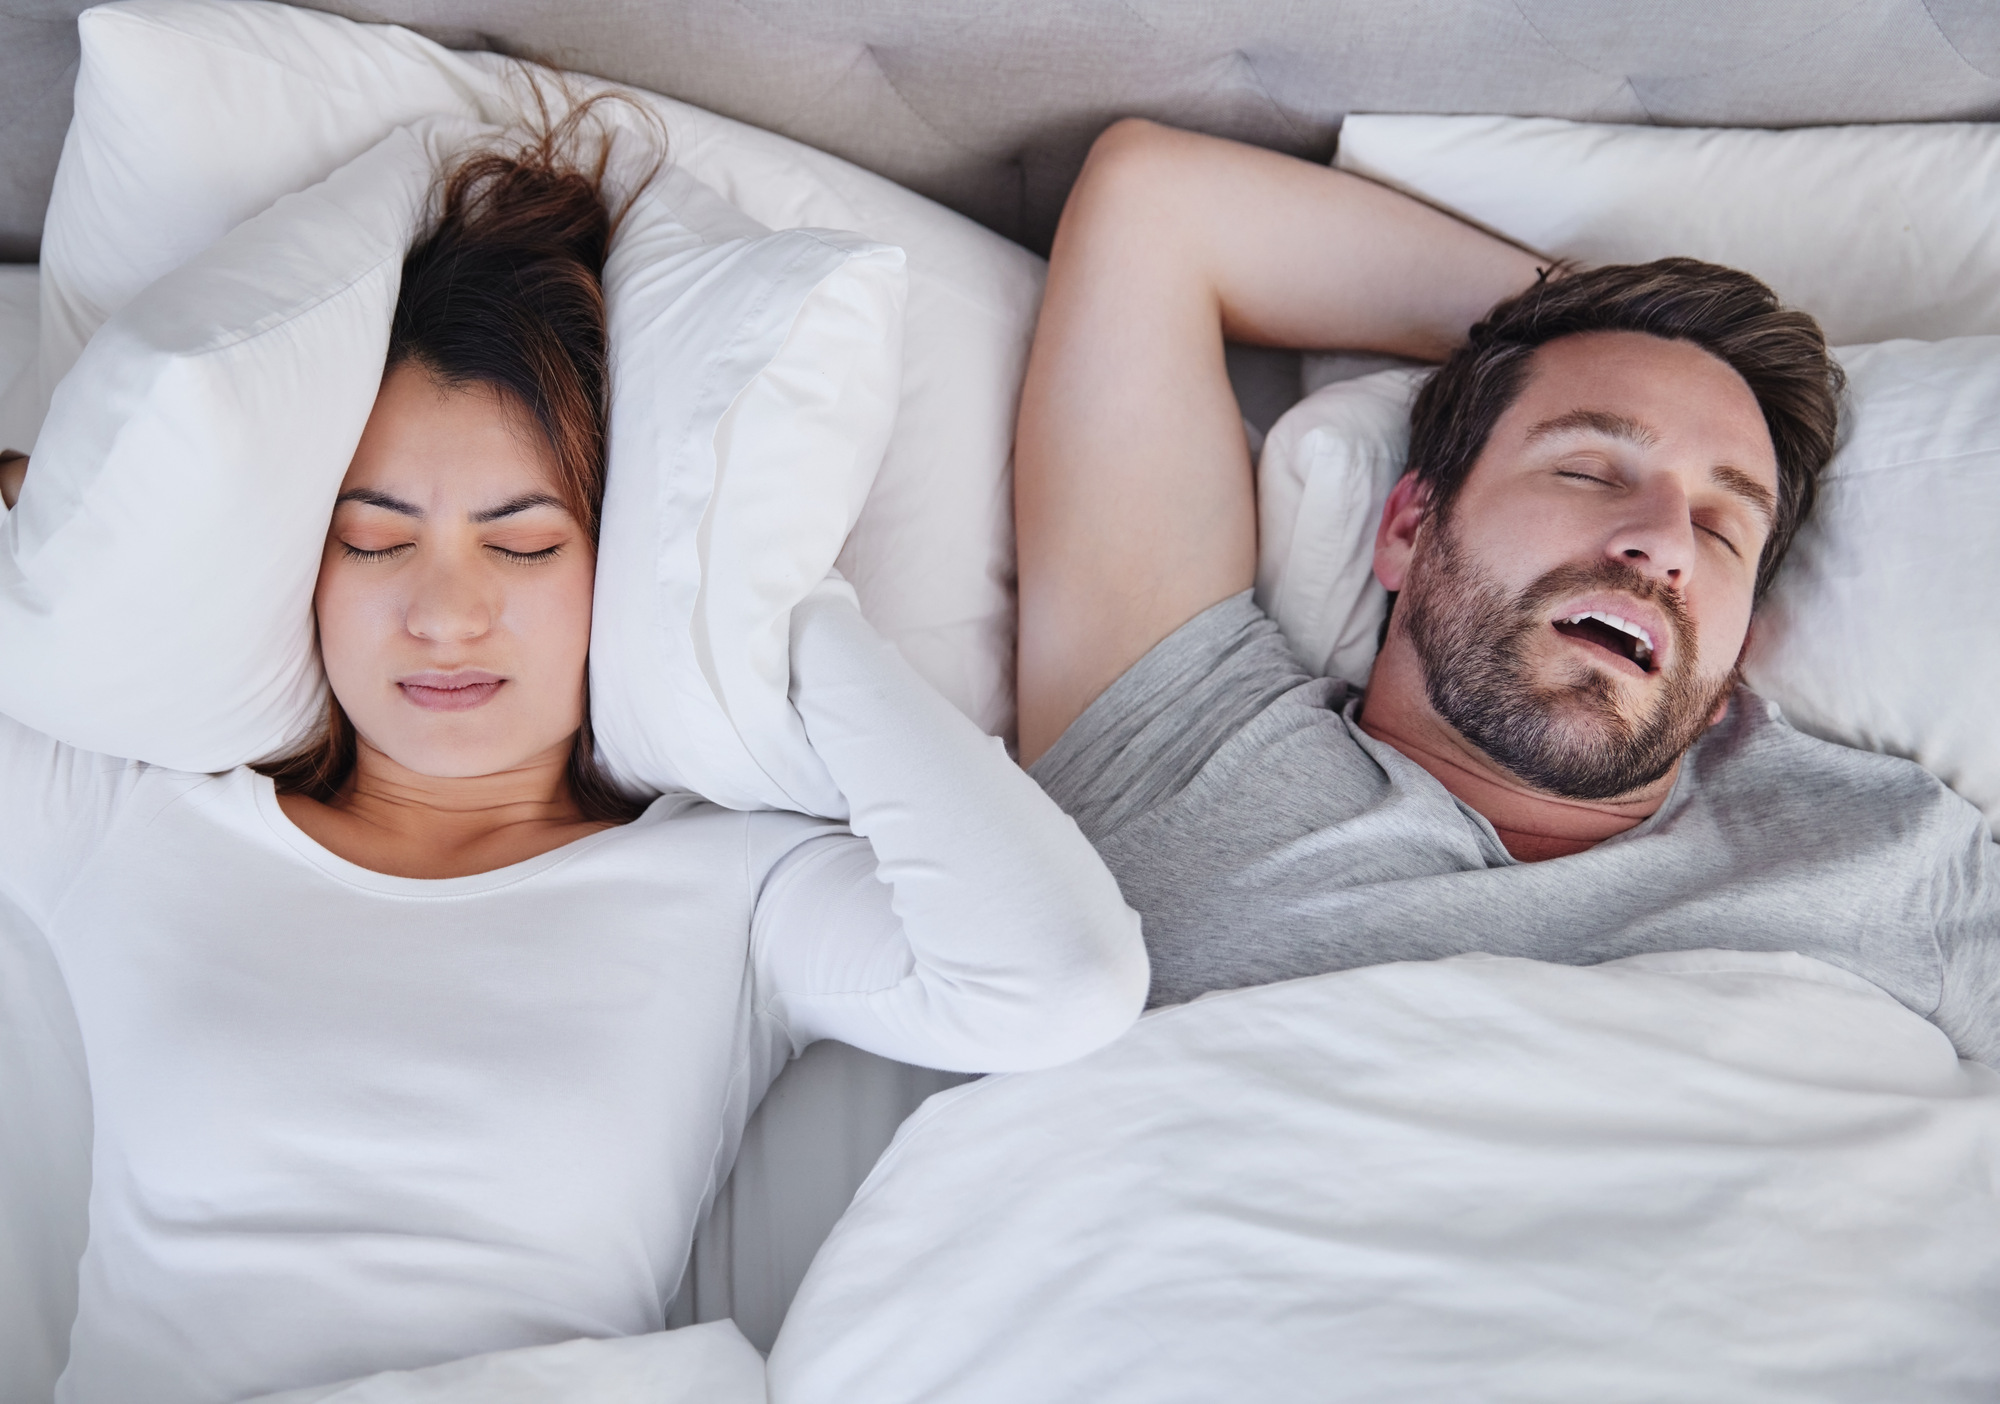 A person snoring and another one holding their ears